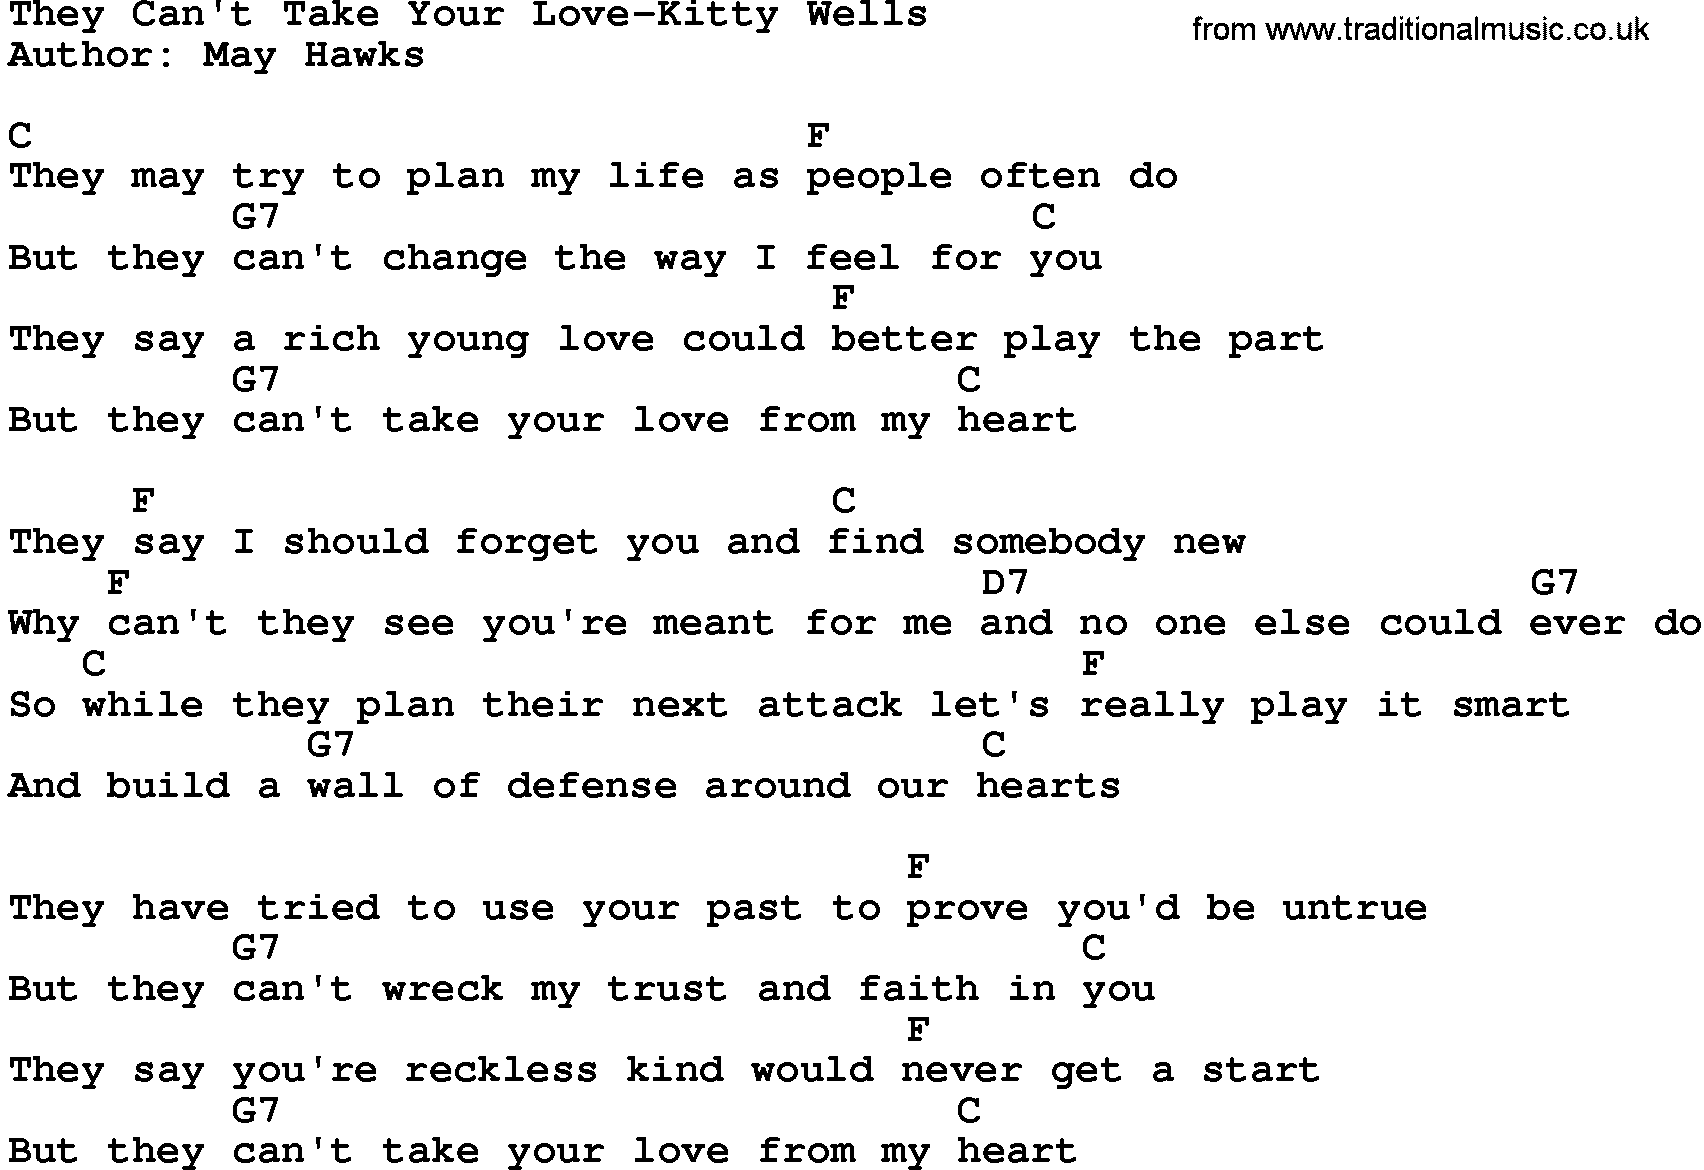 Country music song: They Can't Take Your Love-Kitty Wells lyrics and chords